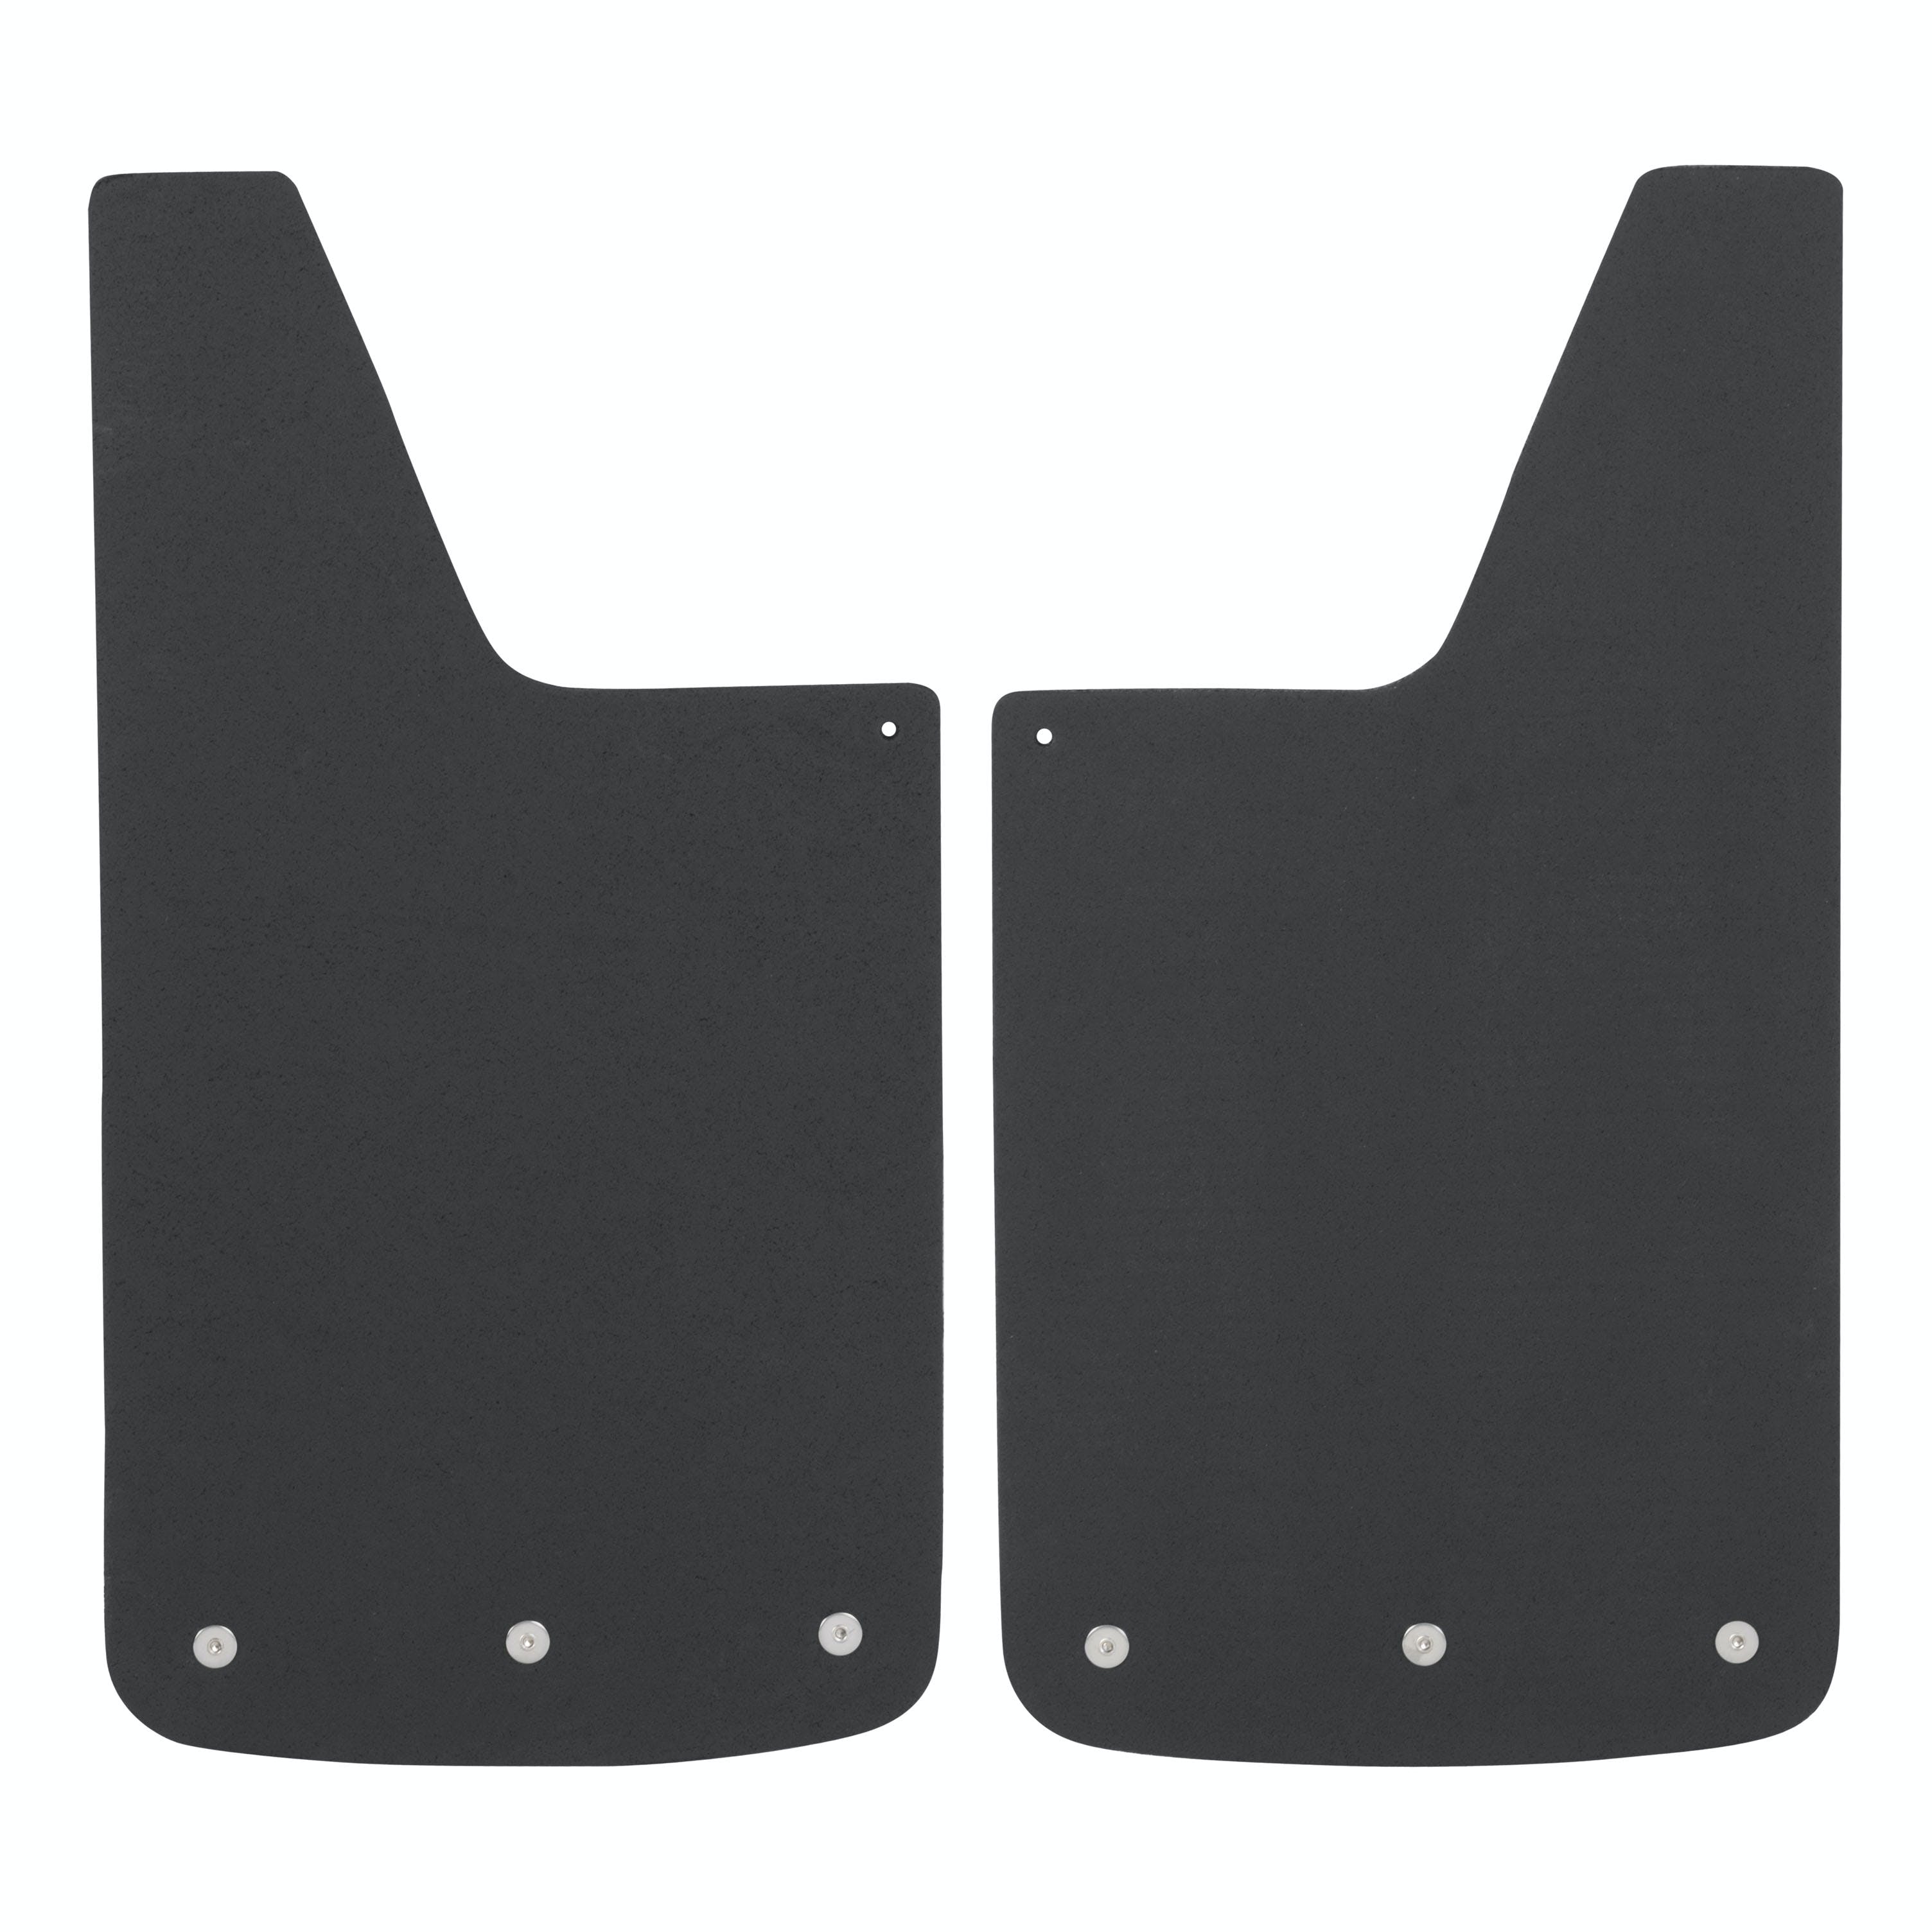 LUVERNE 251223 Universal Textured Rubber Mud Guards